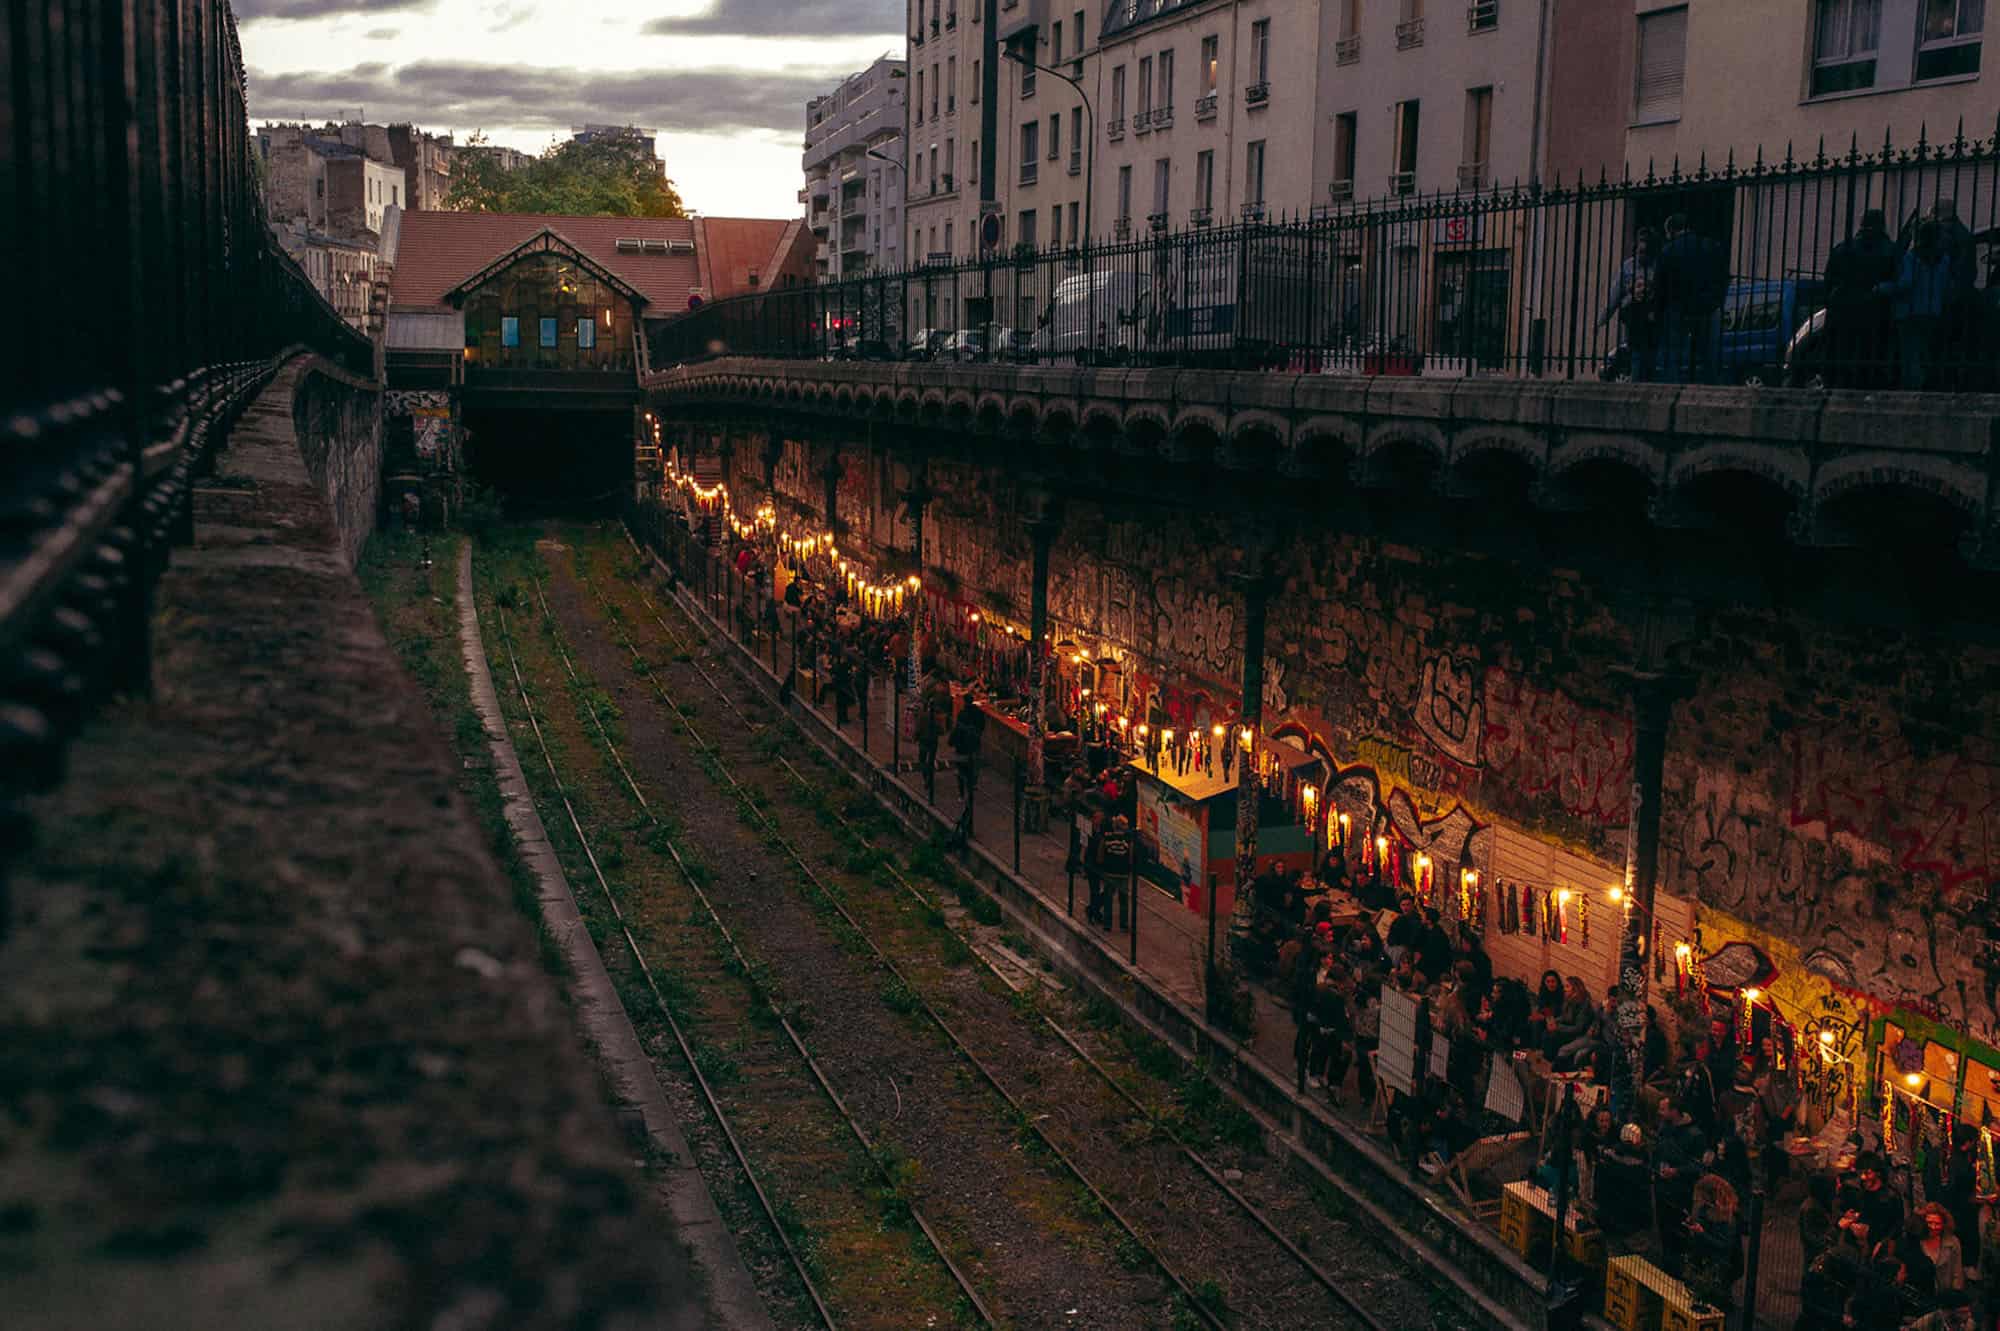 View of the Hasard Ludique bar with its outdoor summer terrace in Paris covered in graffiti on the old platform of an abandoned train station.